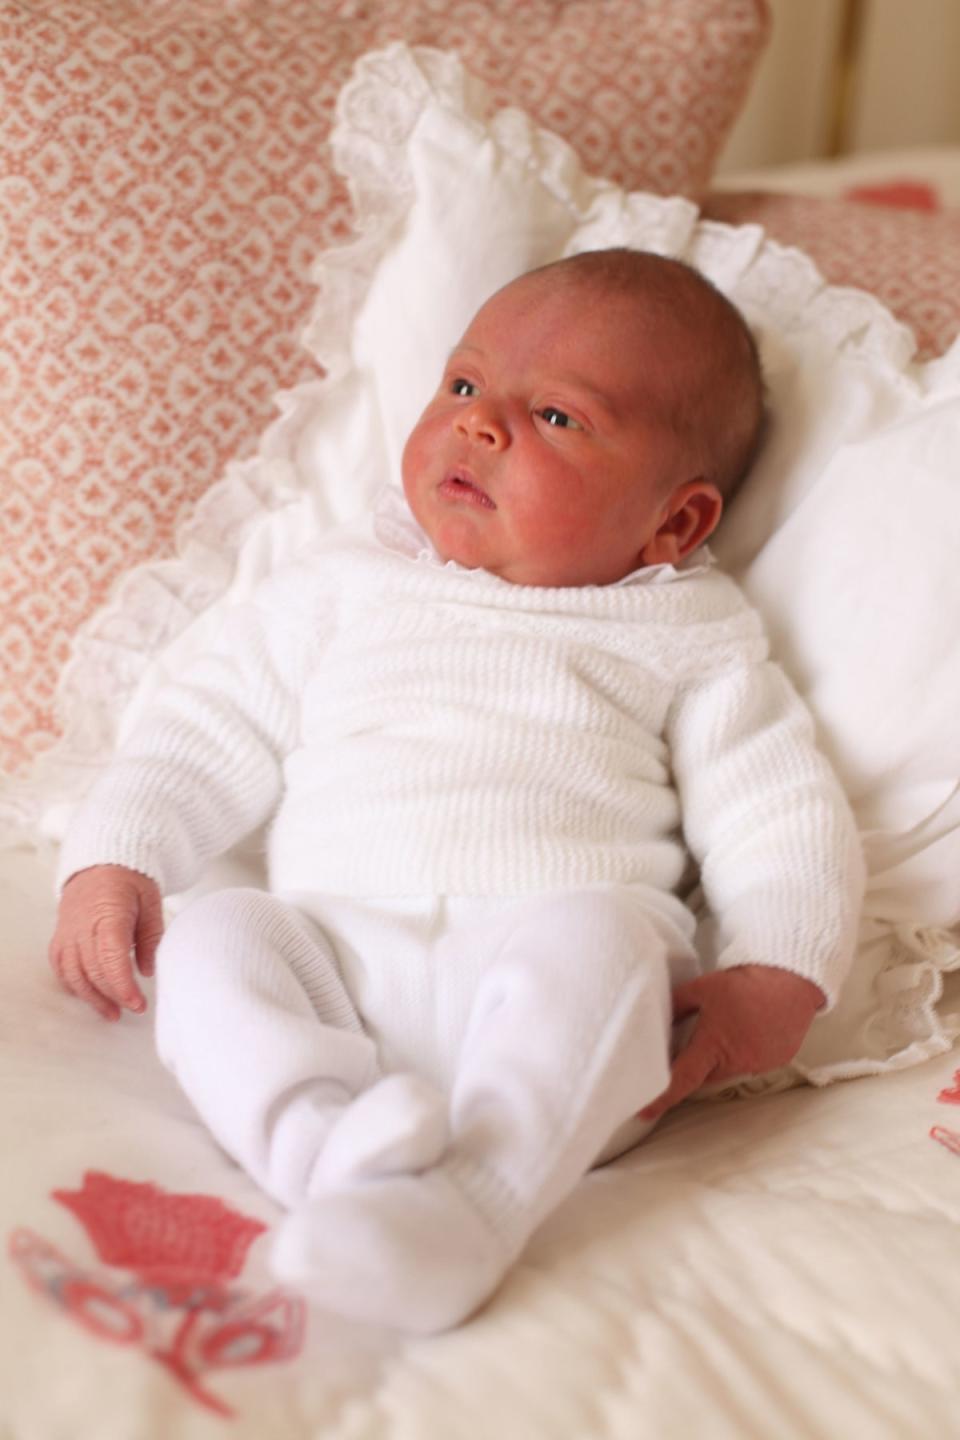 Newborn Prince Louis during his first days at home at Kensington Palace (HRH The Duchess of Cambridge )